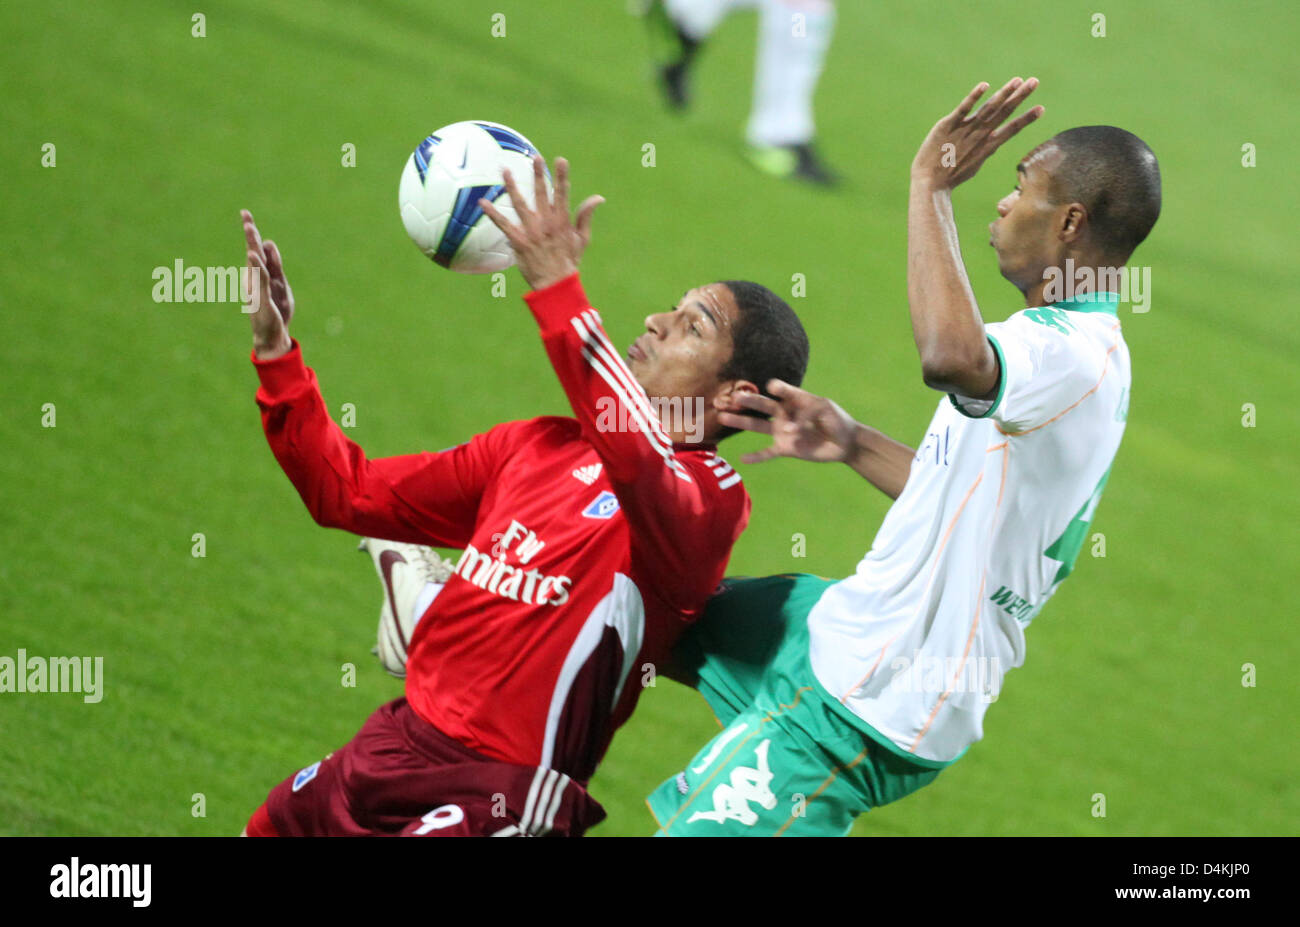 Werder Bremen?s Naldo (R) and Hamburg?s Jose Paolo Guerrero vie for the ball during the UEFA Cup semi finals first leg match Werder Bremen vs SV Hamburg at Weserstadion in Bremen, Germany, 30 April 2009. SV Hamburg defeated Werder Bremen 0-1. Photo: Kay Nietfeld Stock Photo